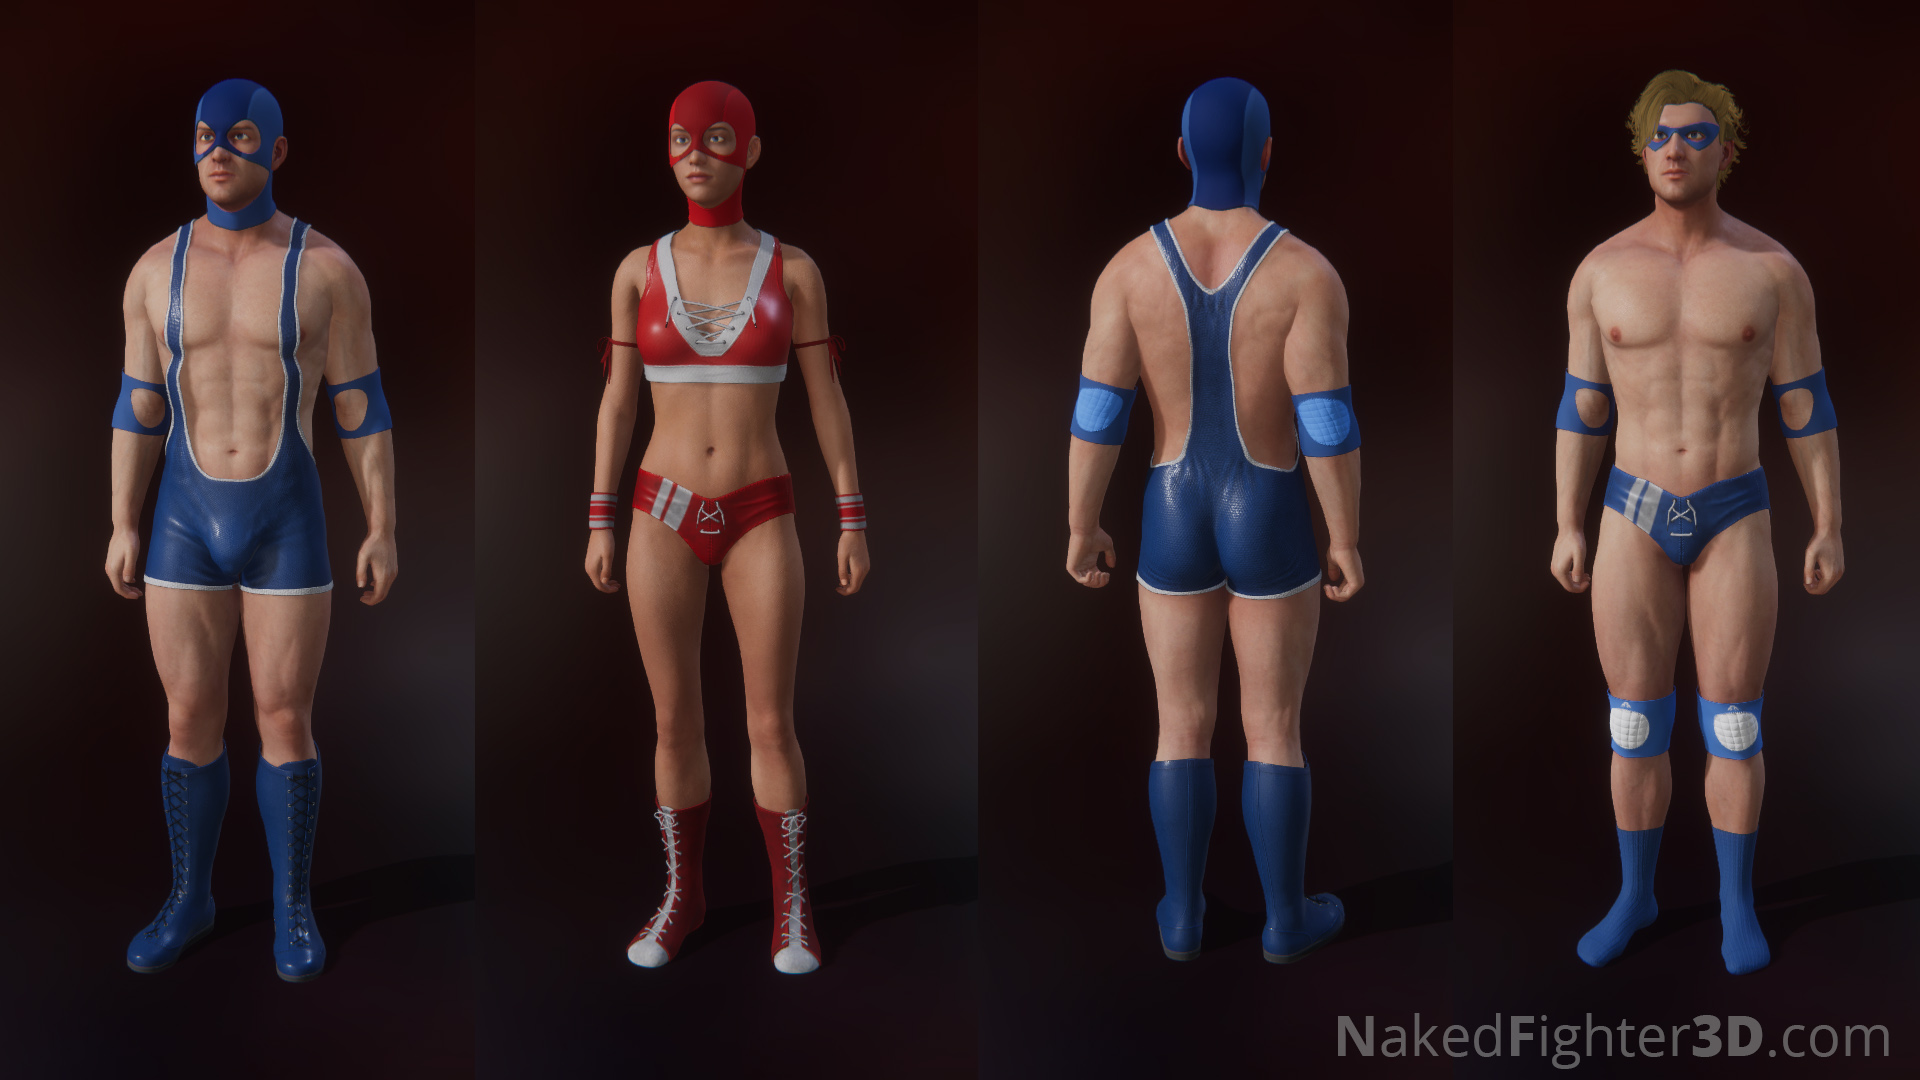 Big Update Is Coming In A Few Days Naked Fighter 3d By Nakedfighter3d 7266